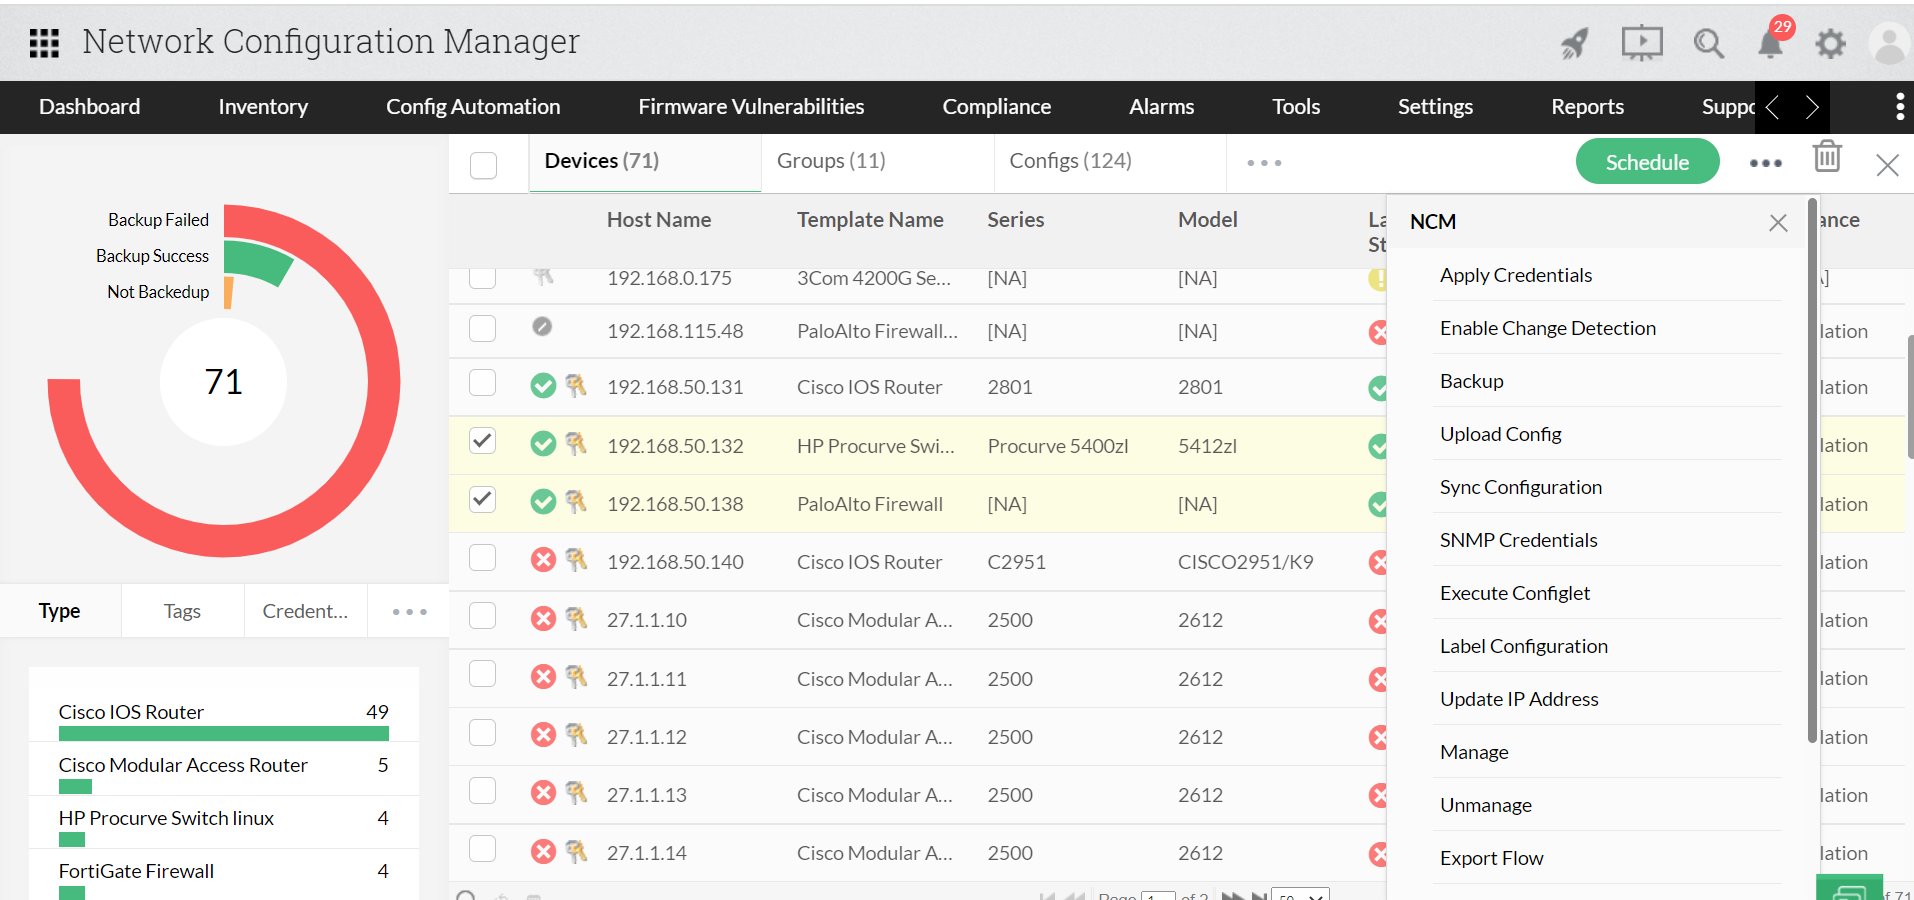 Network Backup Solutions - ManageEngine Network Configuration Manager